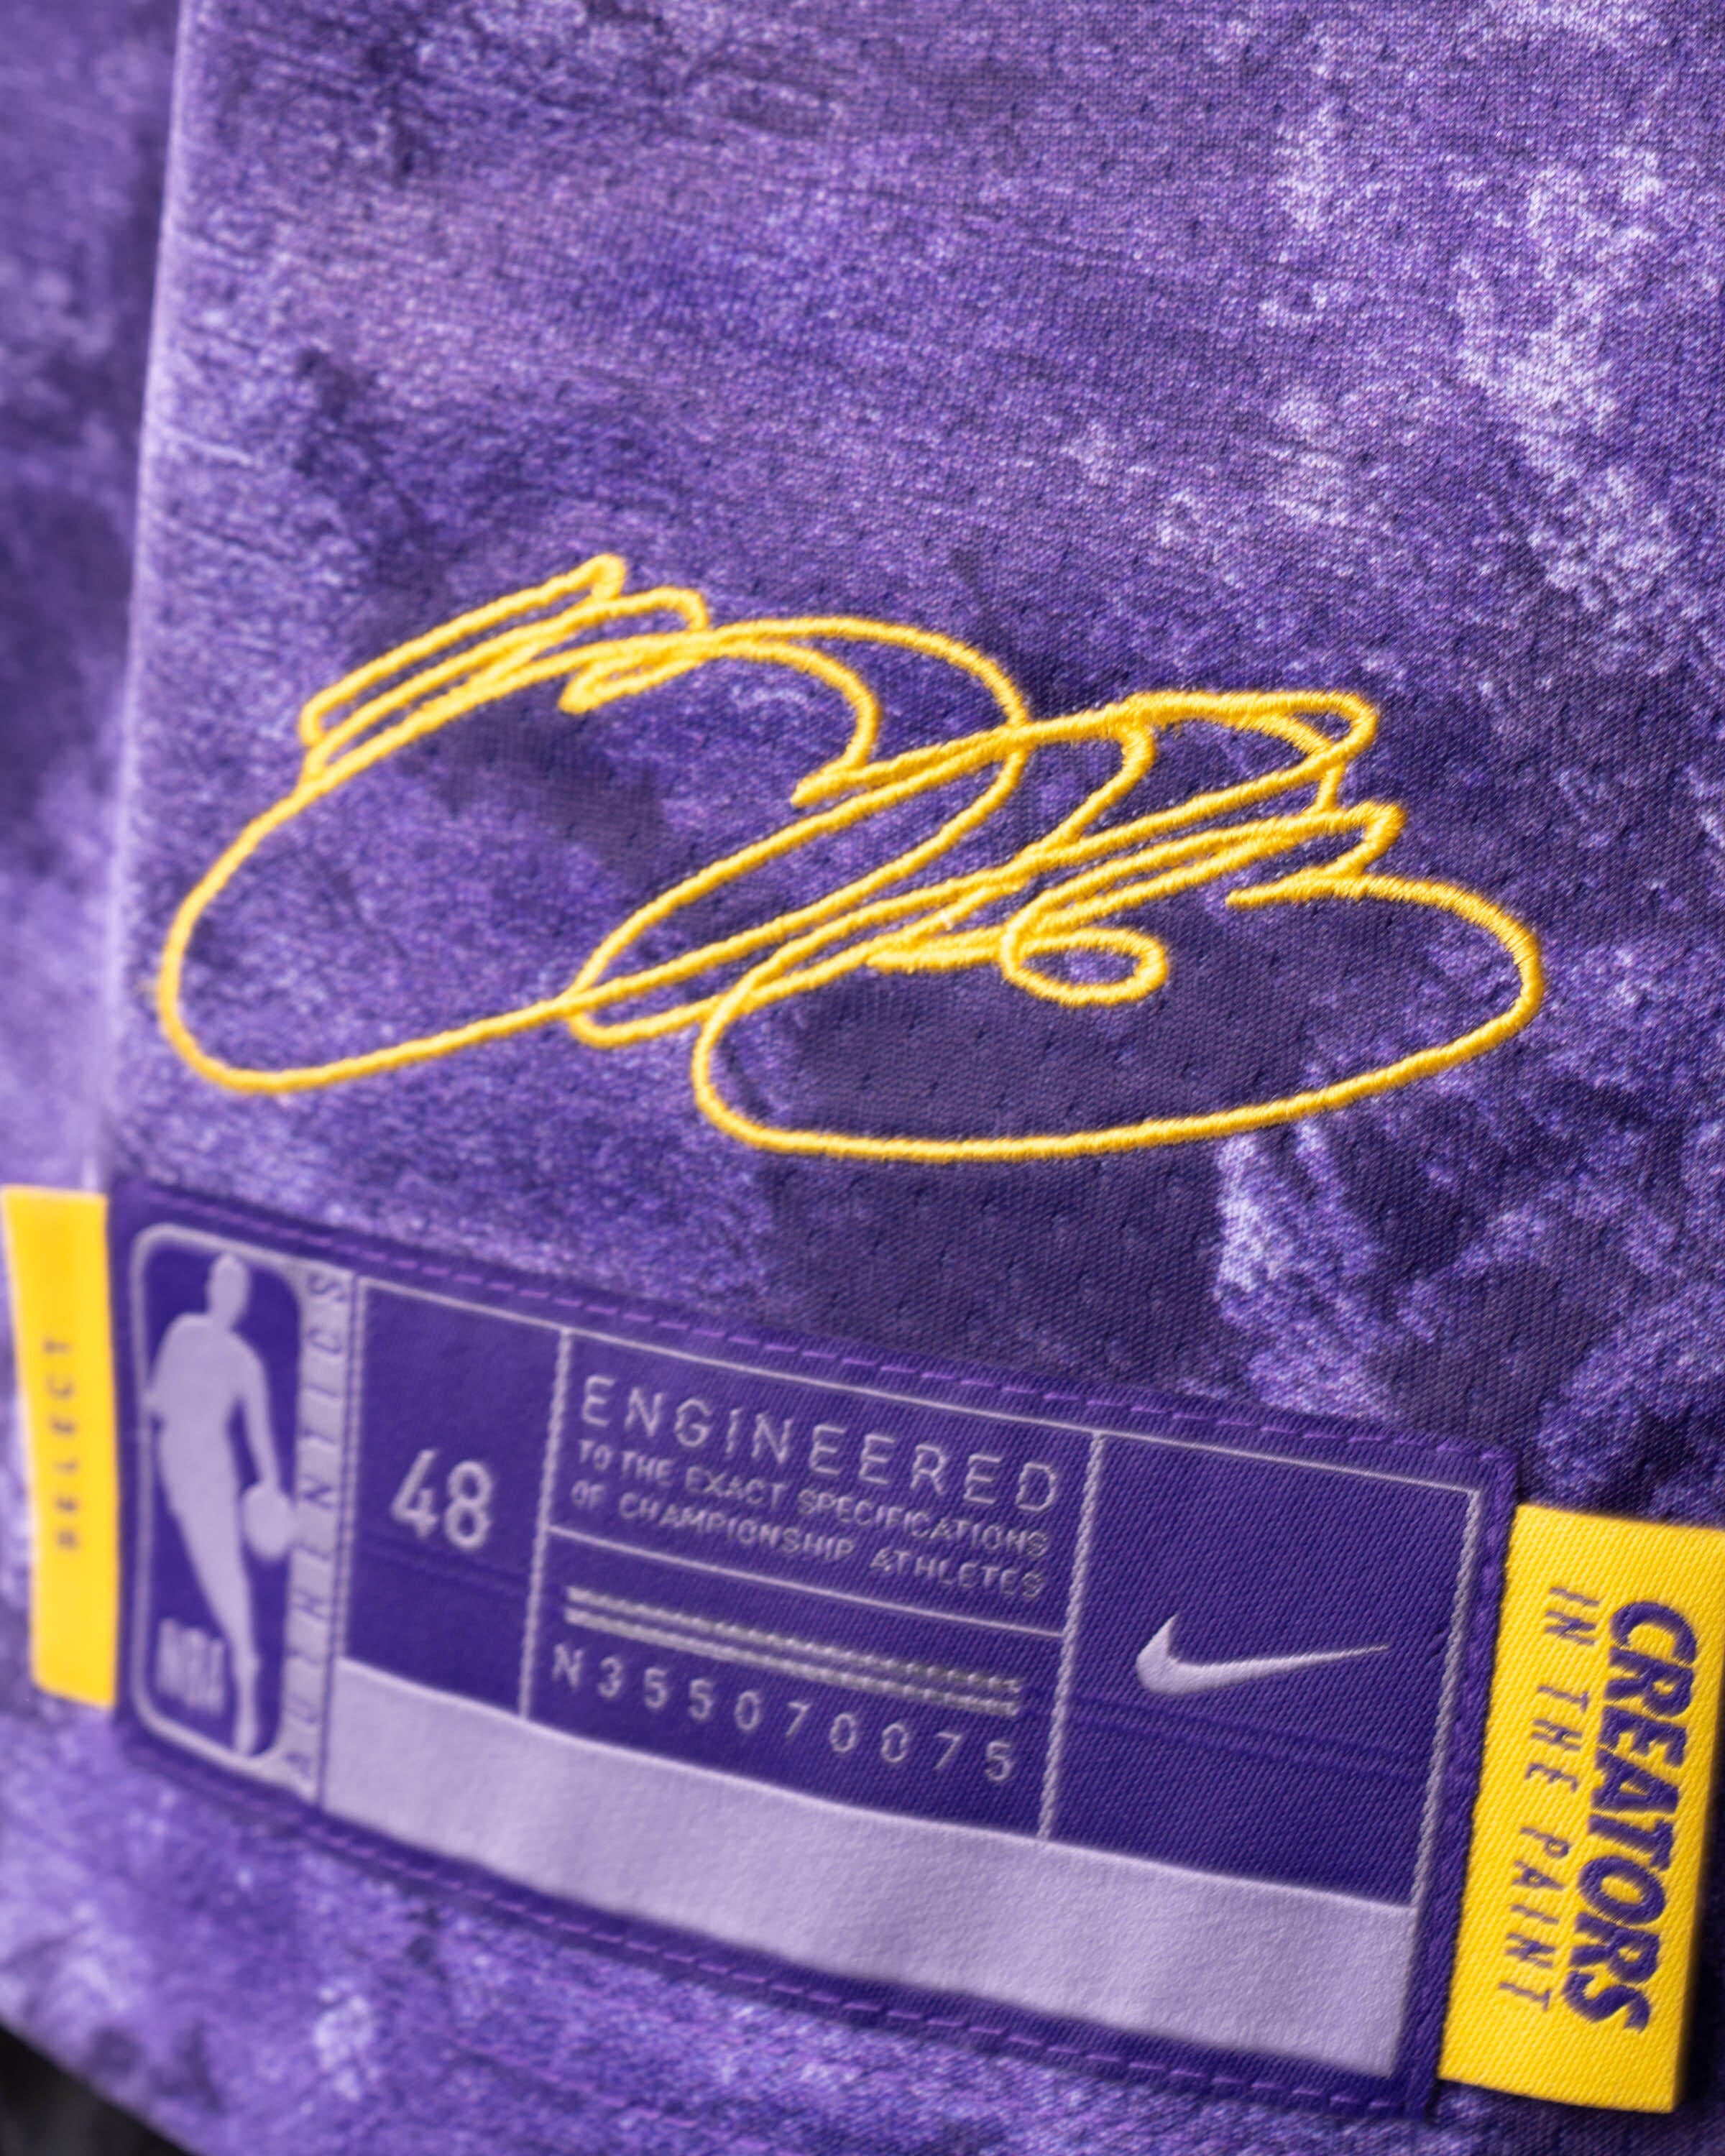 LeBron James BAPE X Mitchell & Ness Special Edition Lakers Jersey (Swingman  Version)